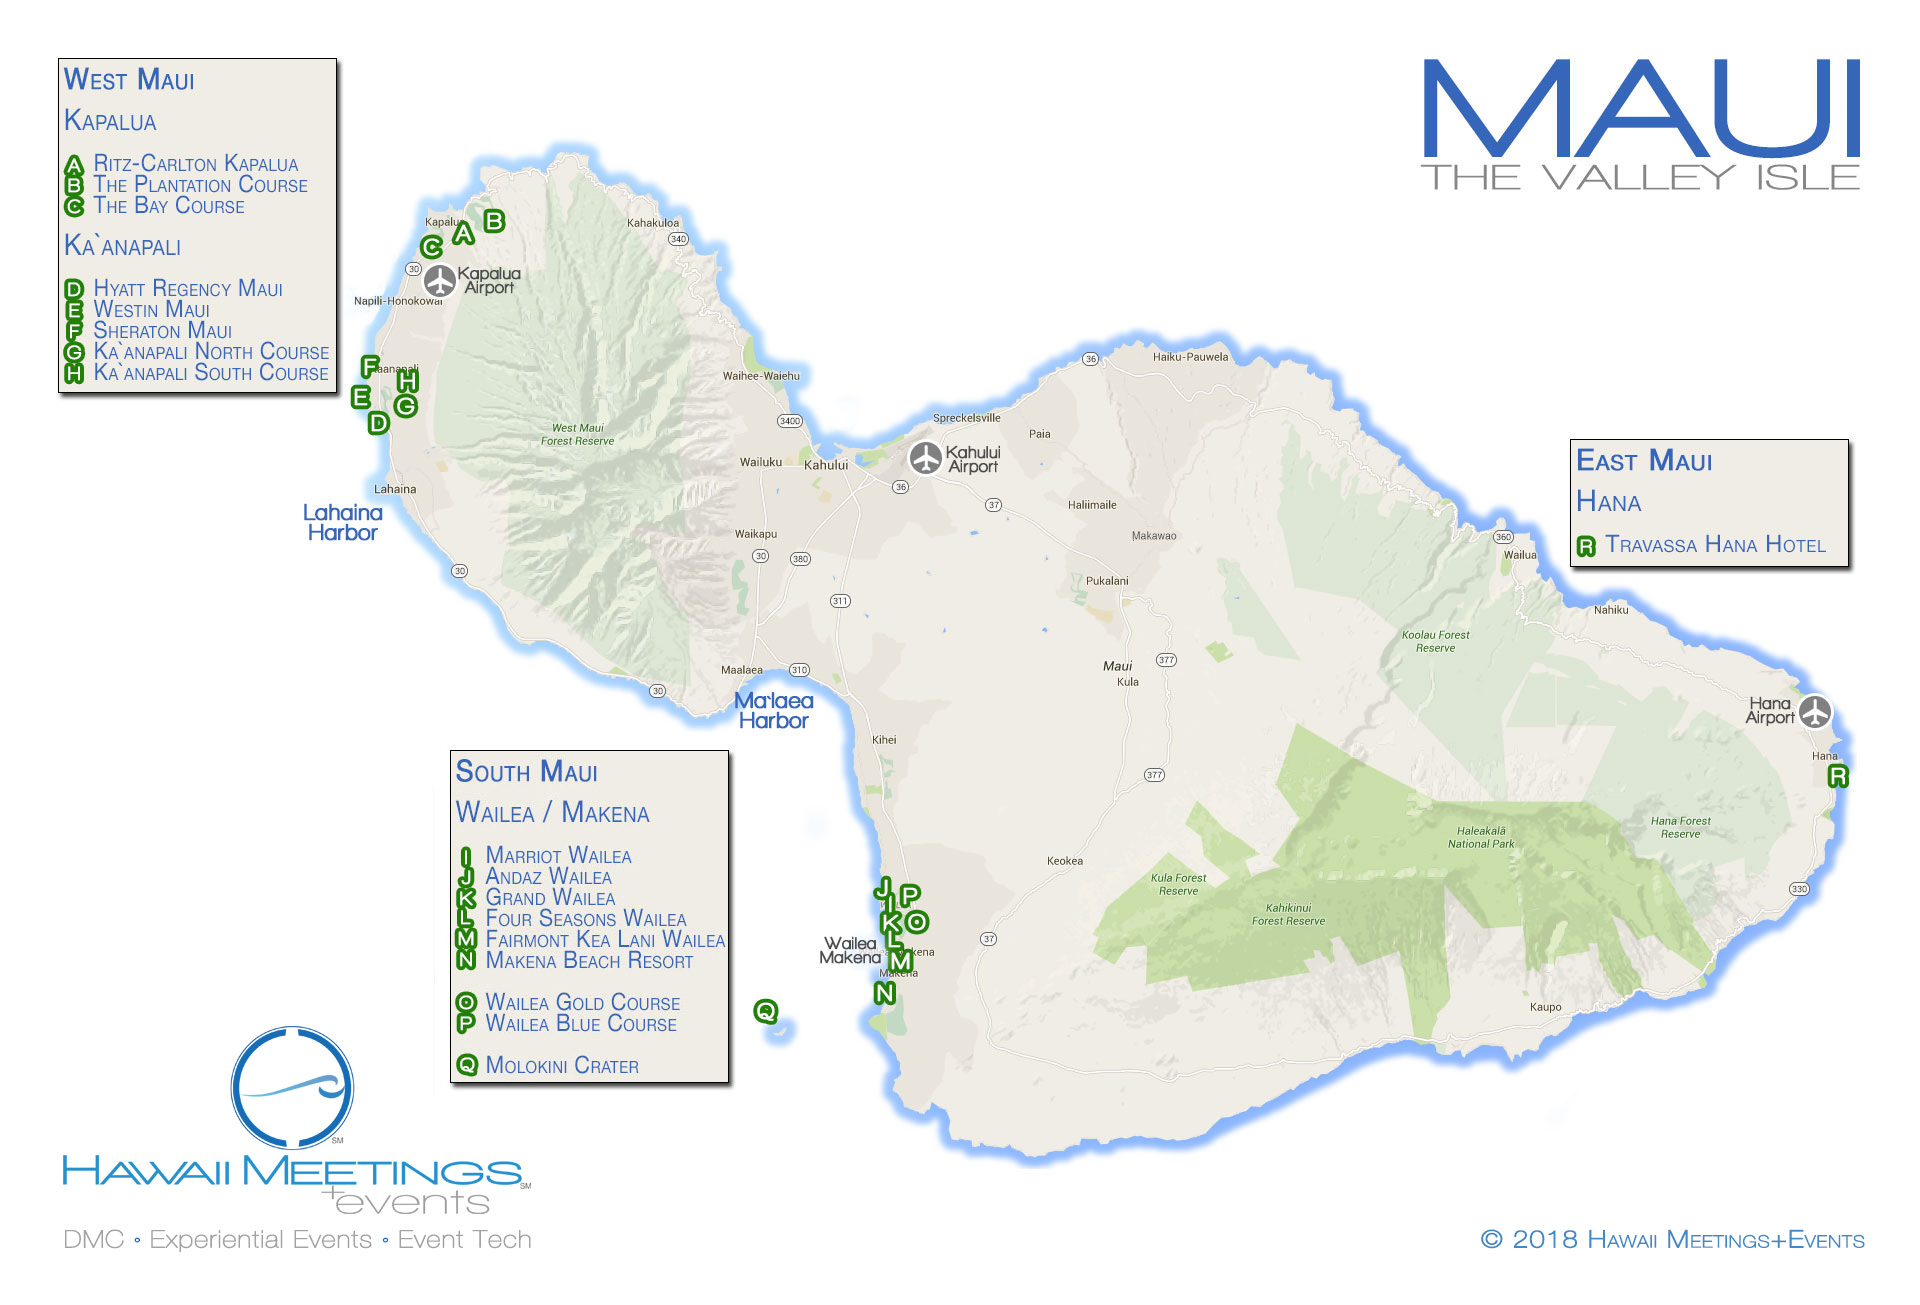 This map highlights Maui's many meeting and incentive property locations.